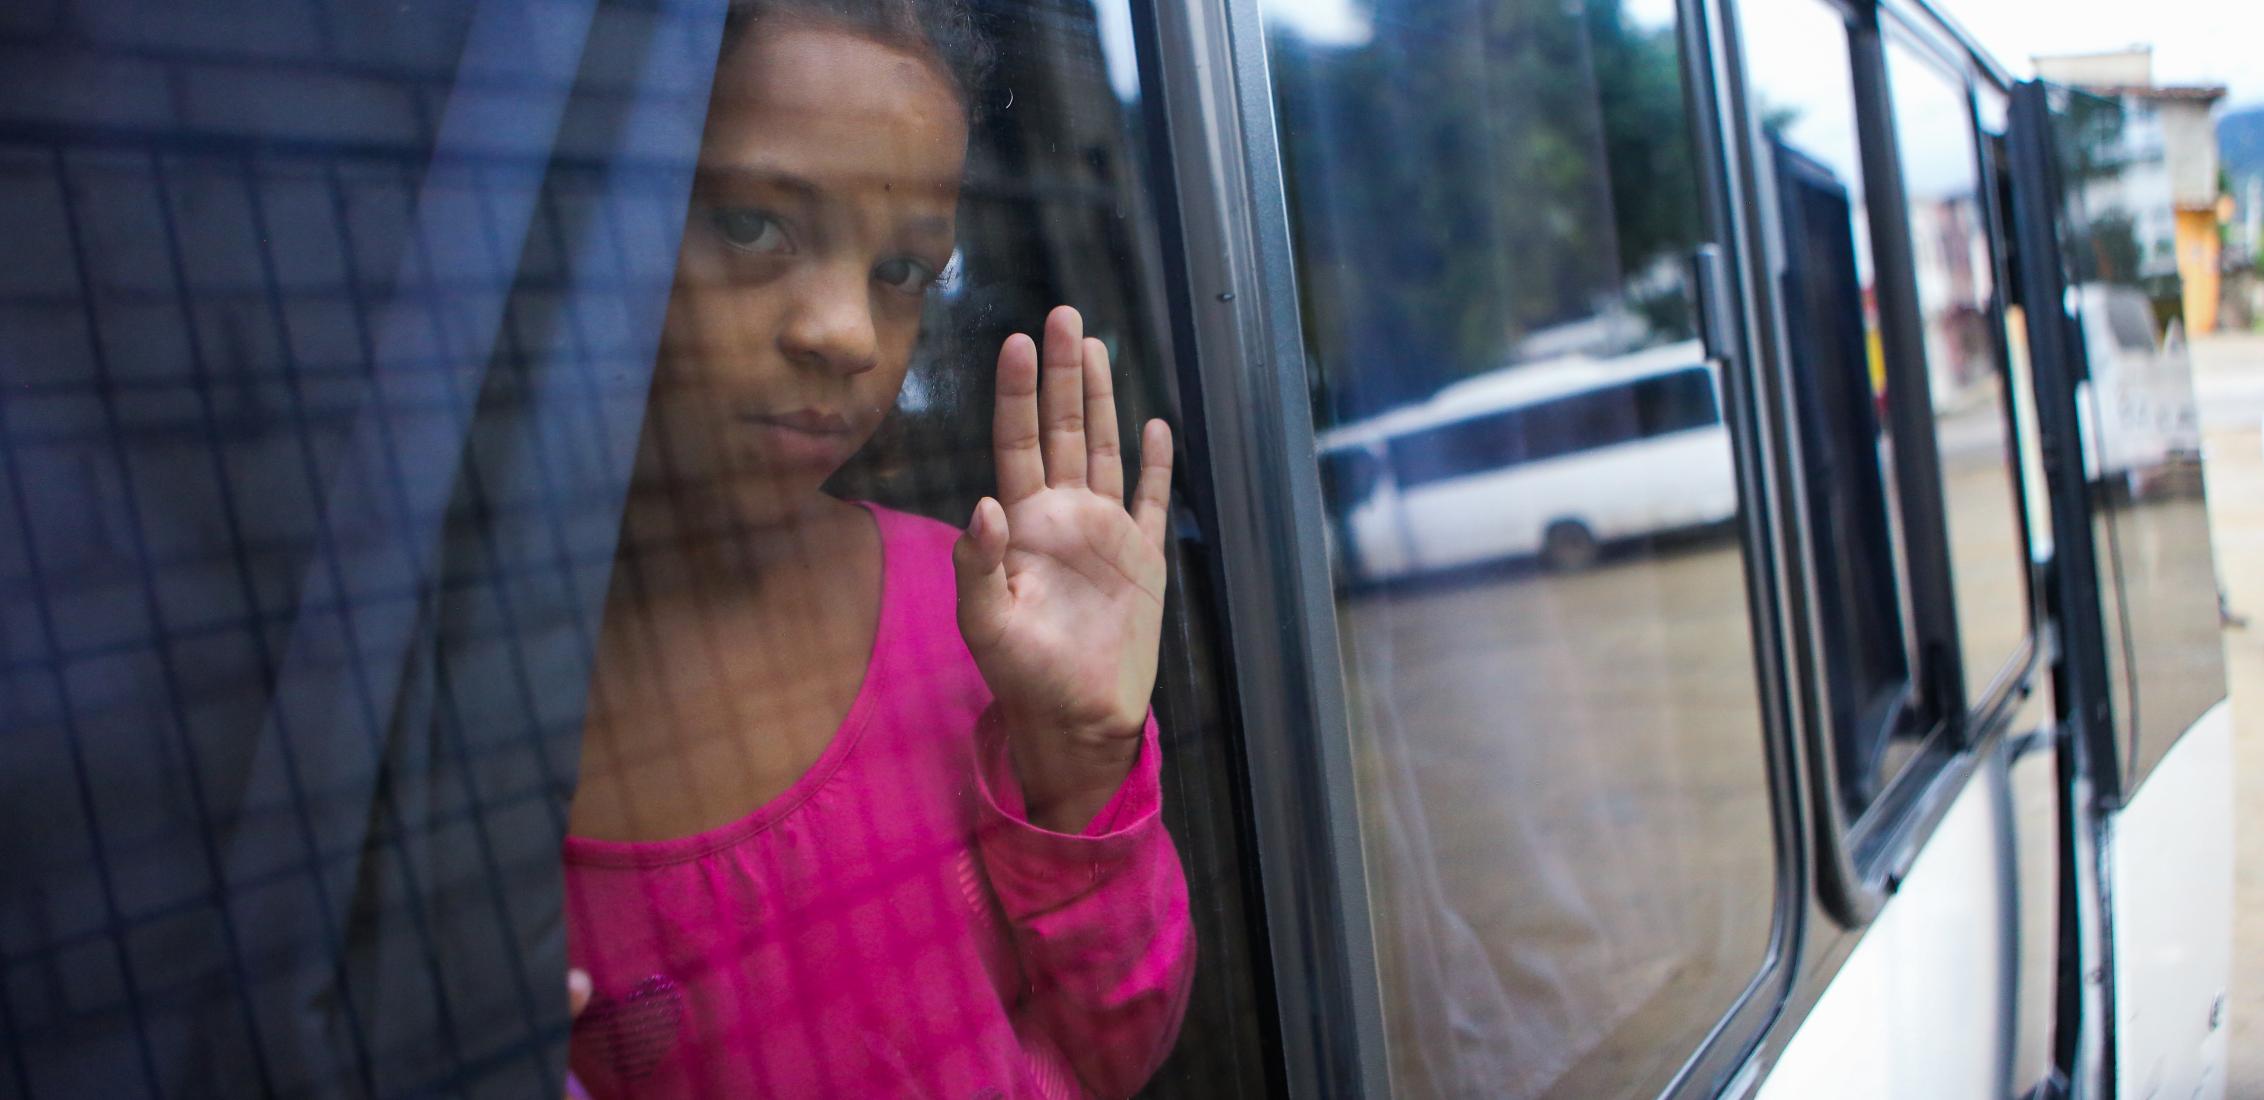 UNI480116/Membreño Edguimar, age 10, looks out of the window of the bus that will transport her to Tegucigalpa to follow the migration route to the United States, after leaving the Temporary Rest Center "Alivio del Sufrimiento" located in El Paraíso, on 4 November, 2023 in Honduras.